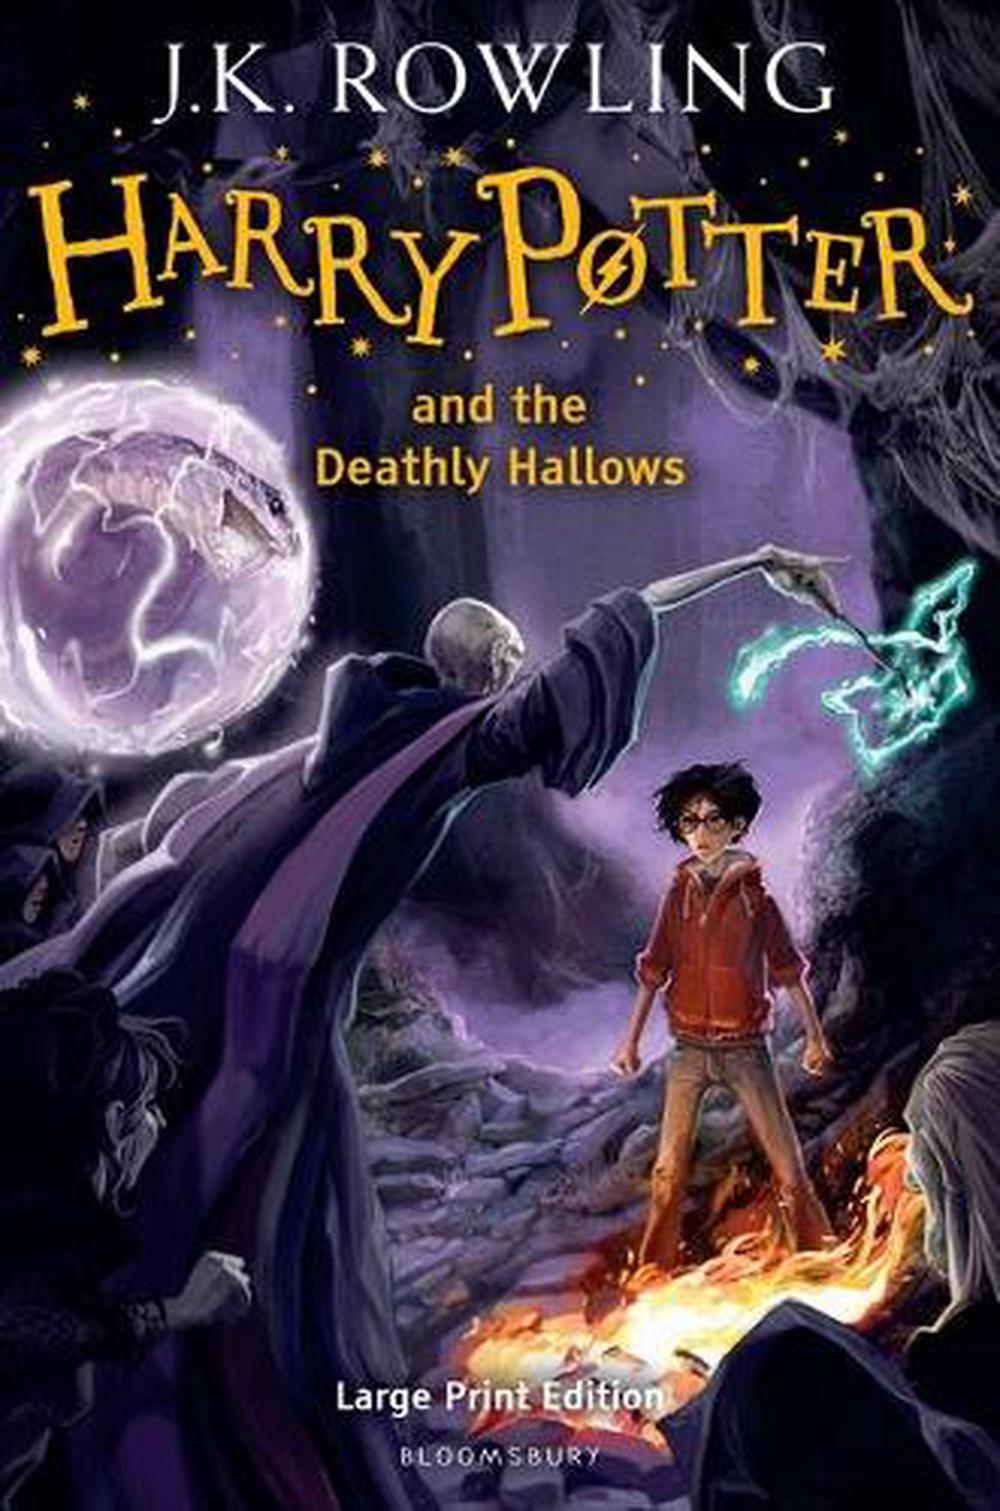 audiobook of harry potter and the deathly hallows part 1